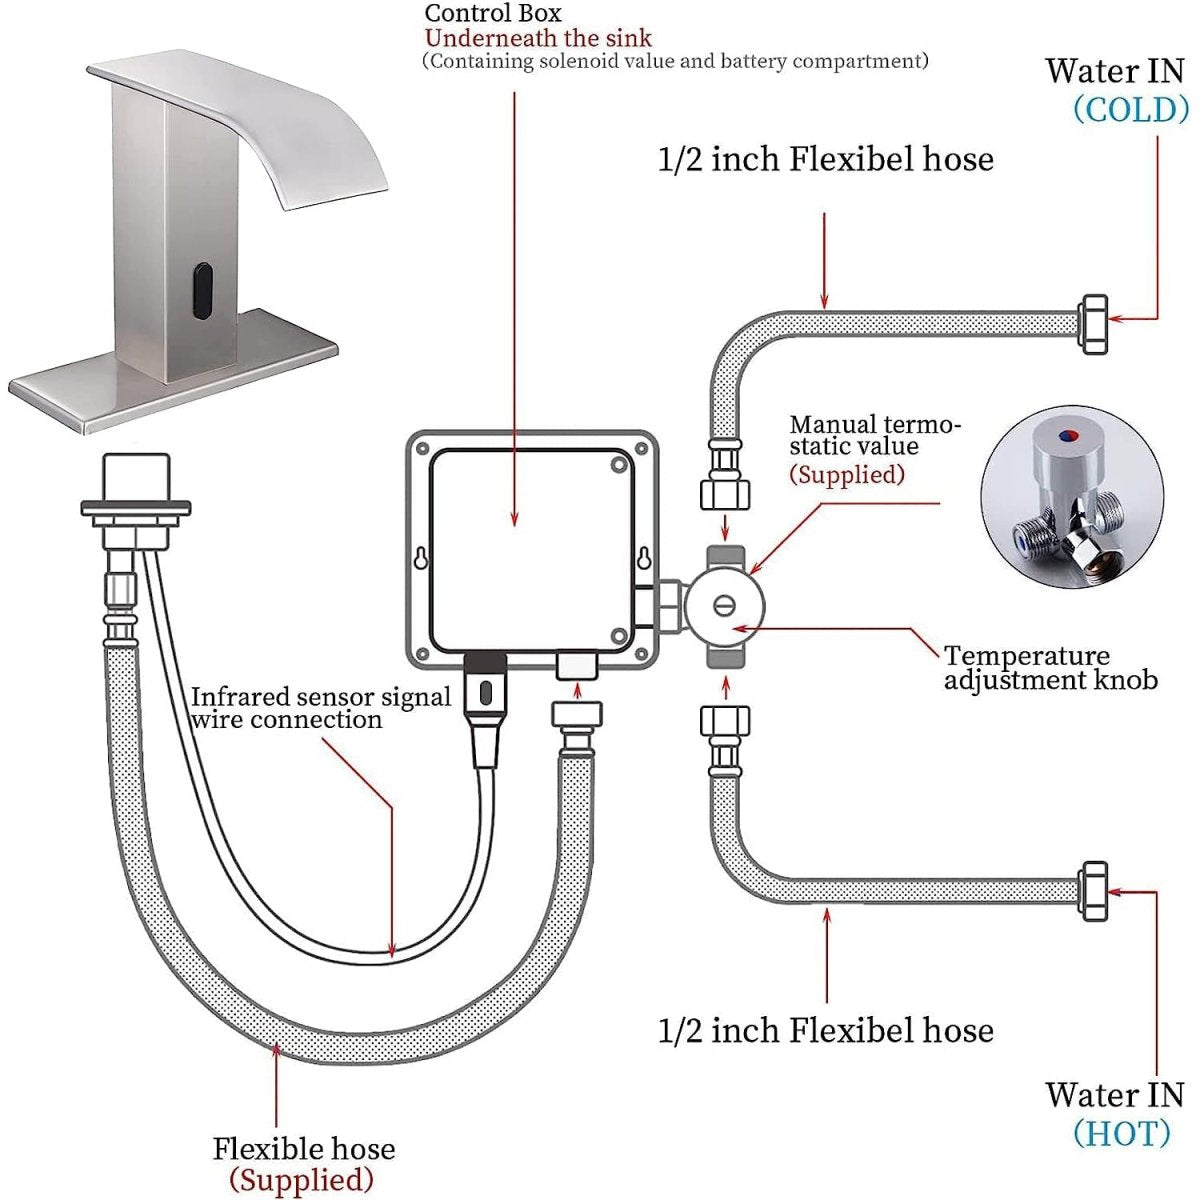 DC Battery Powered Touchless Bathroom Faucet Brushed Nickel - buyfaucet.com